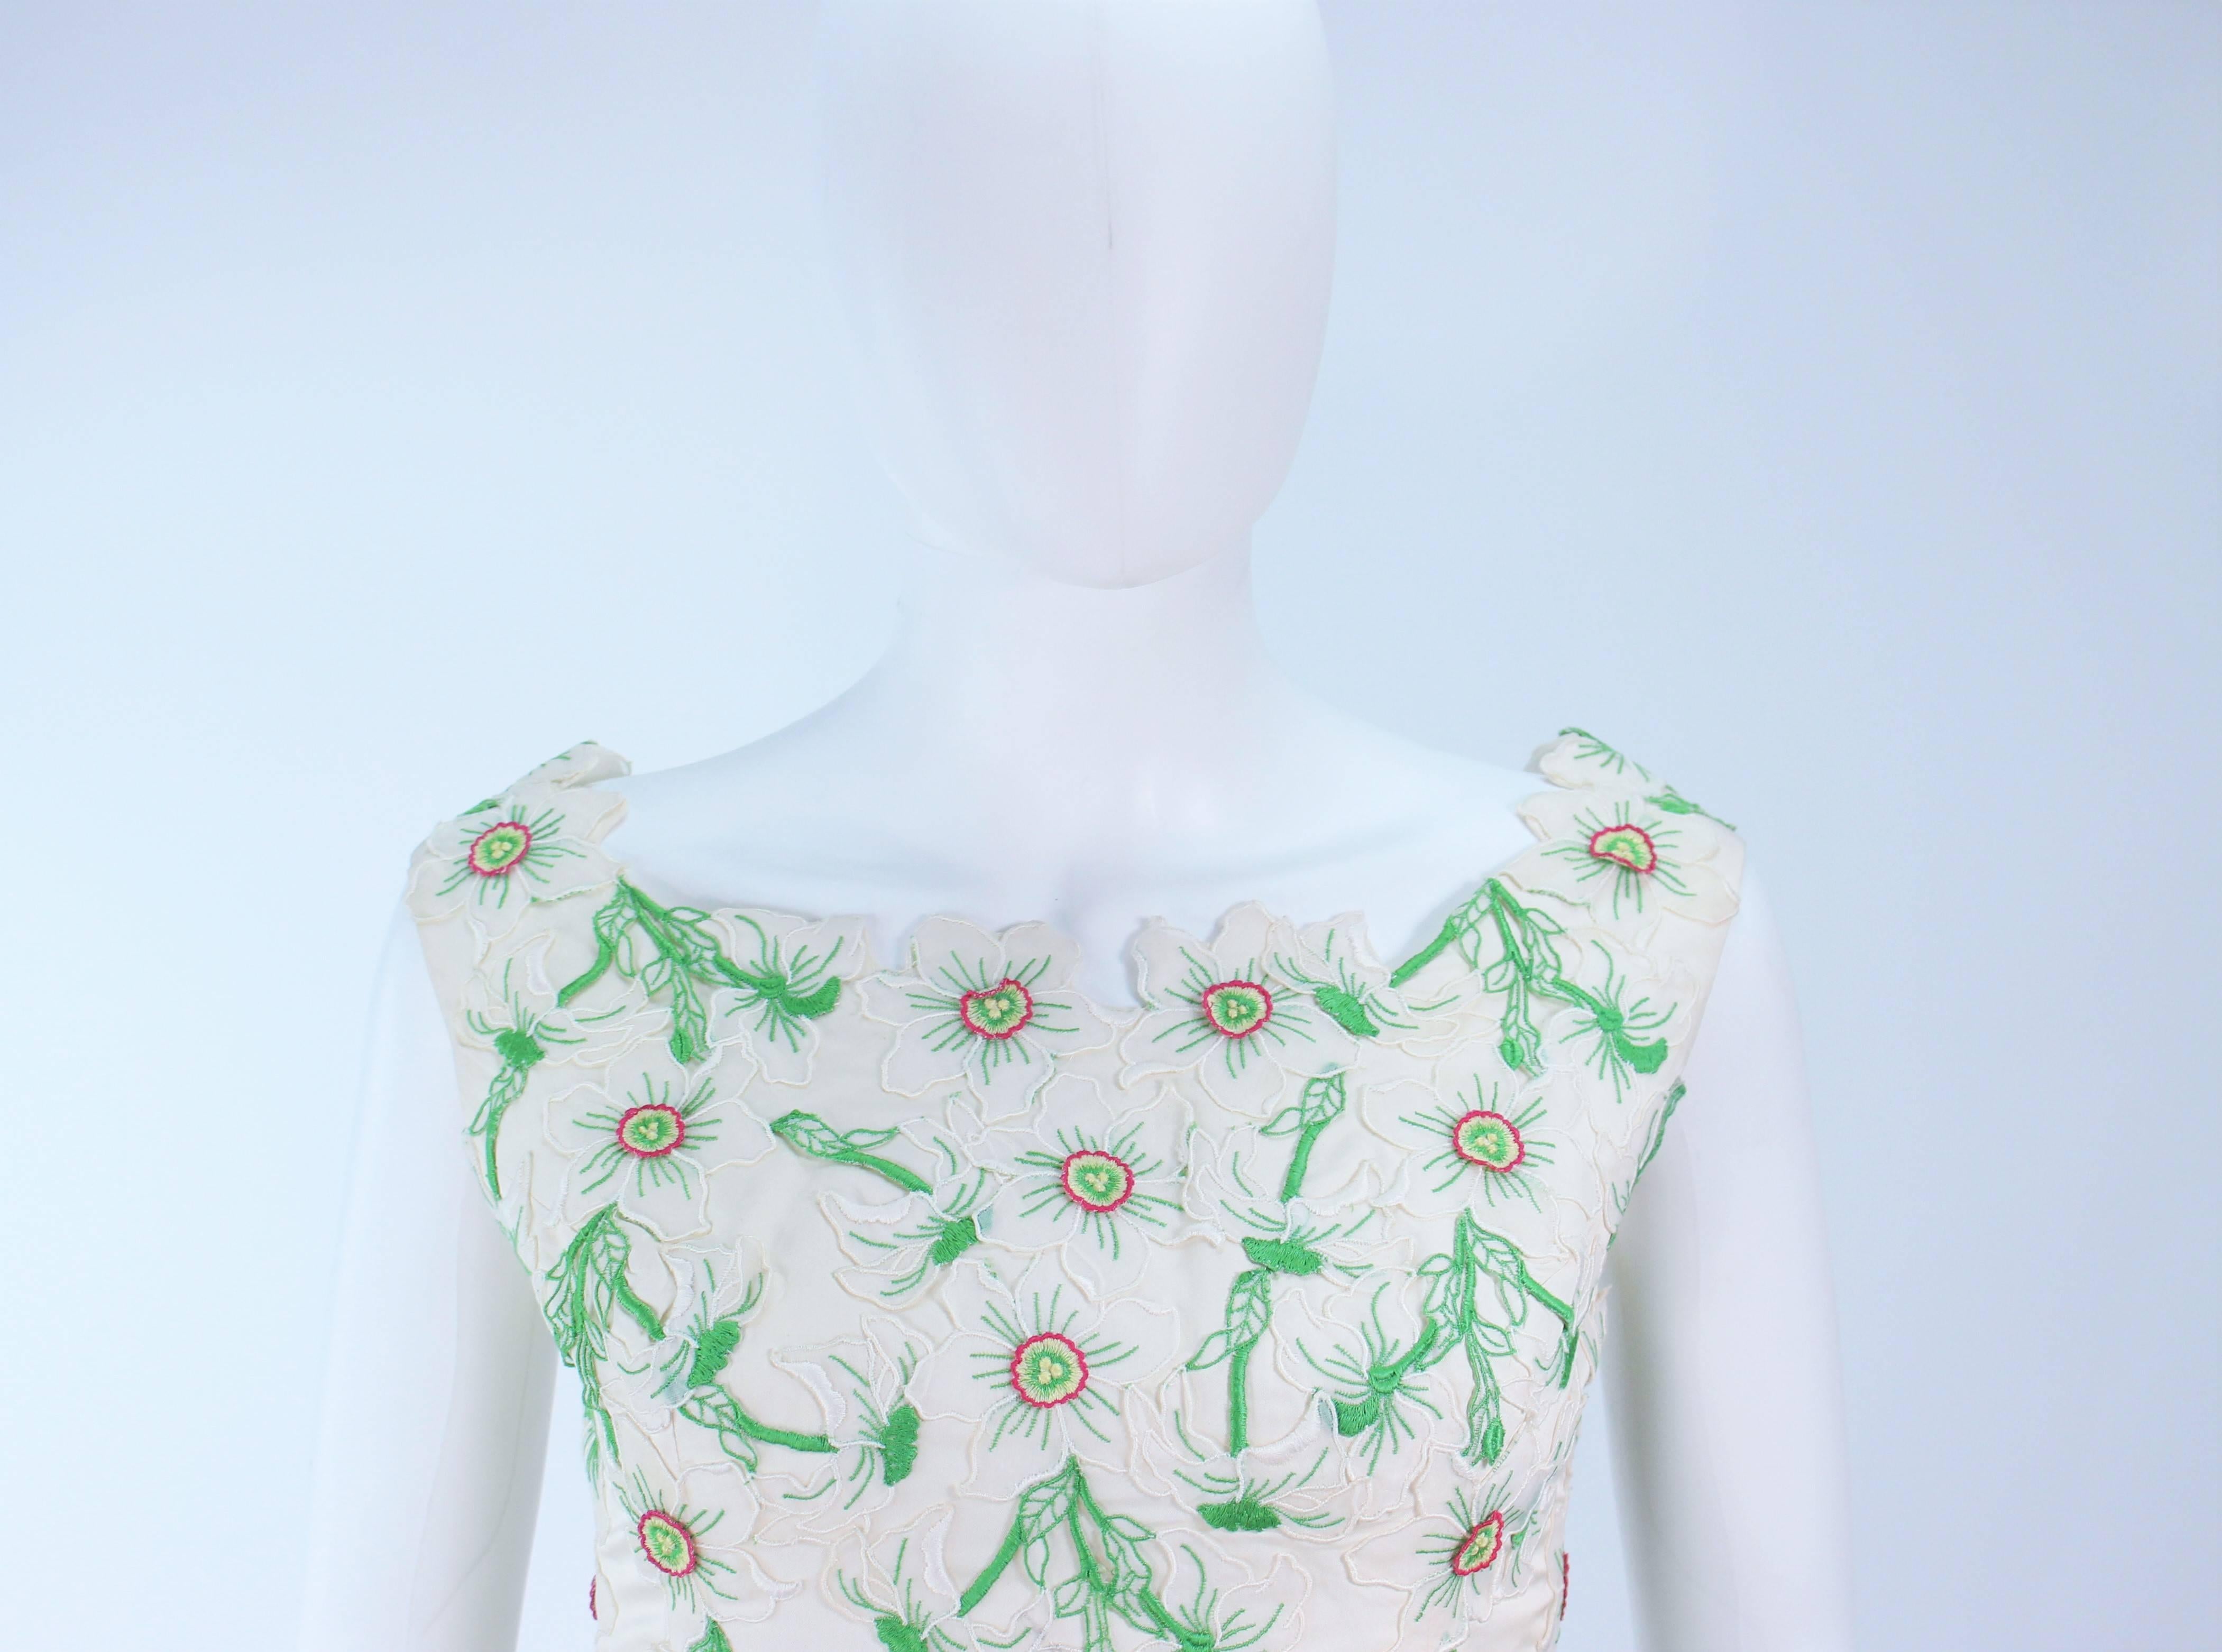 BETTY HIGGINS Cream Floral Pattern Lace Dress Size 4 In Excellent Condition For Sale In Los Angeles, CA